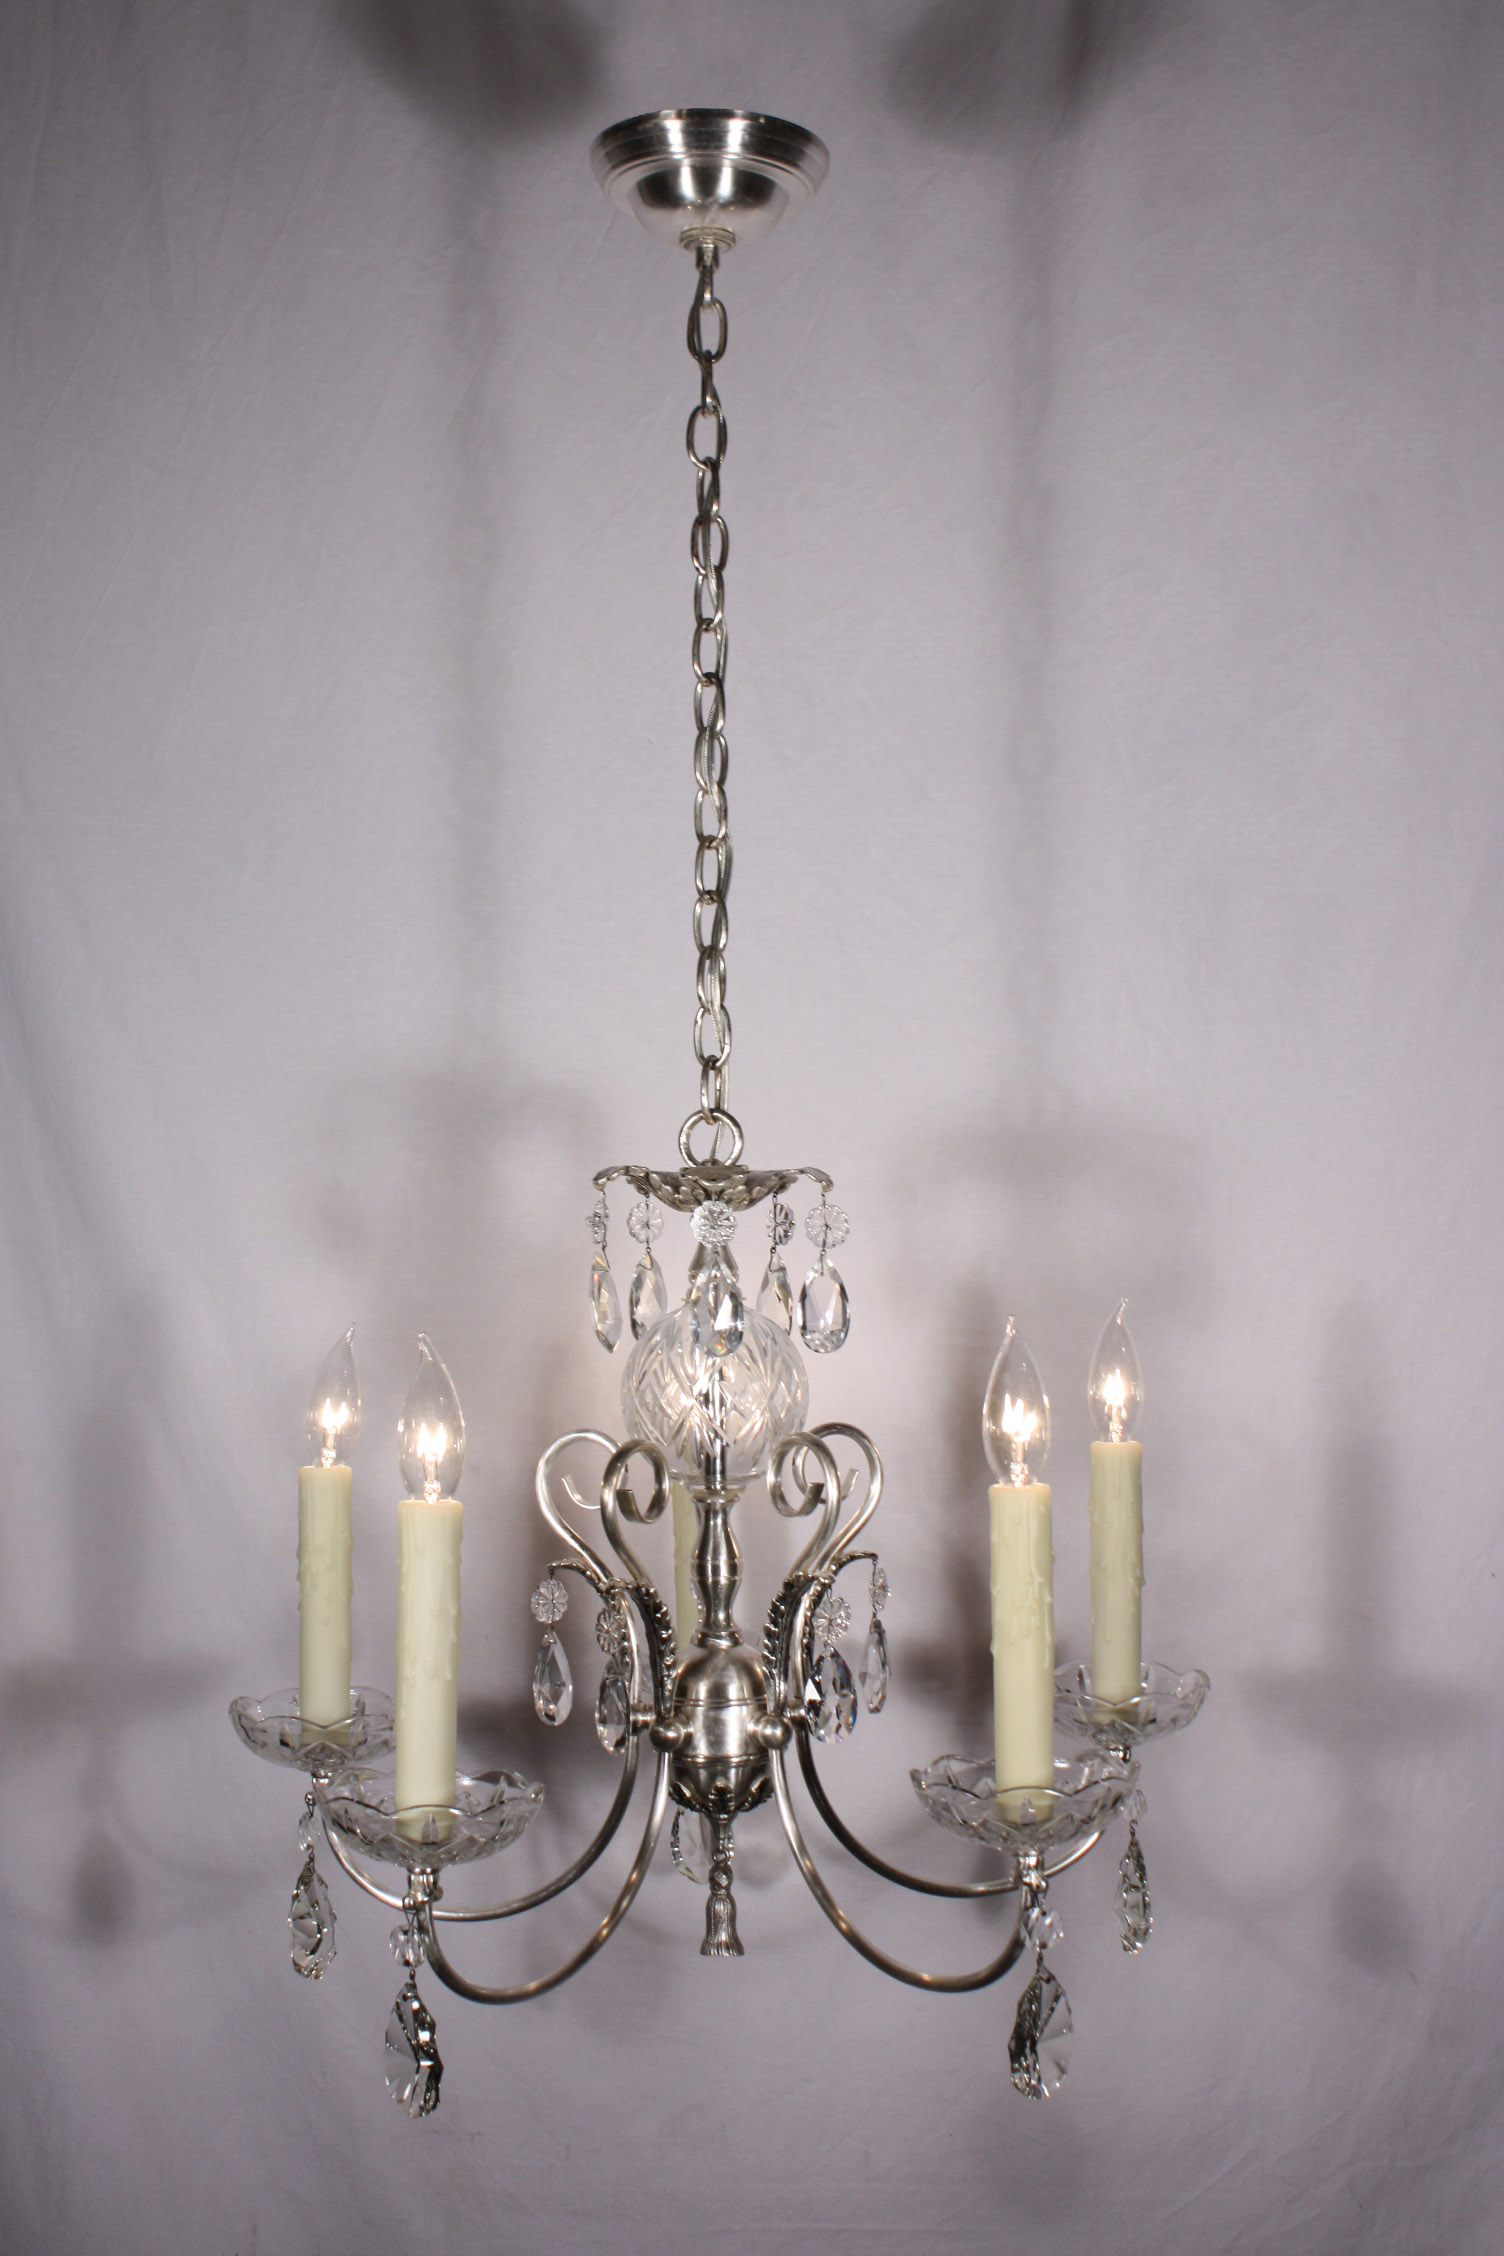 SOLD Superb Antique Georgian Silver Plated Chandelier with Crystal Prisms, c. 1910-18821